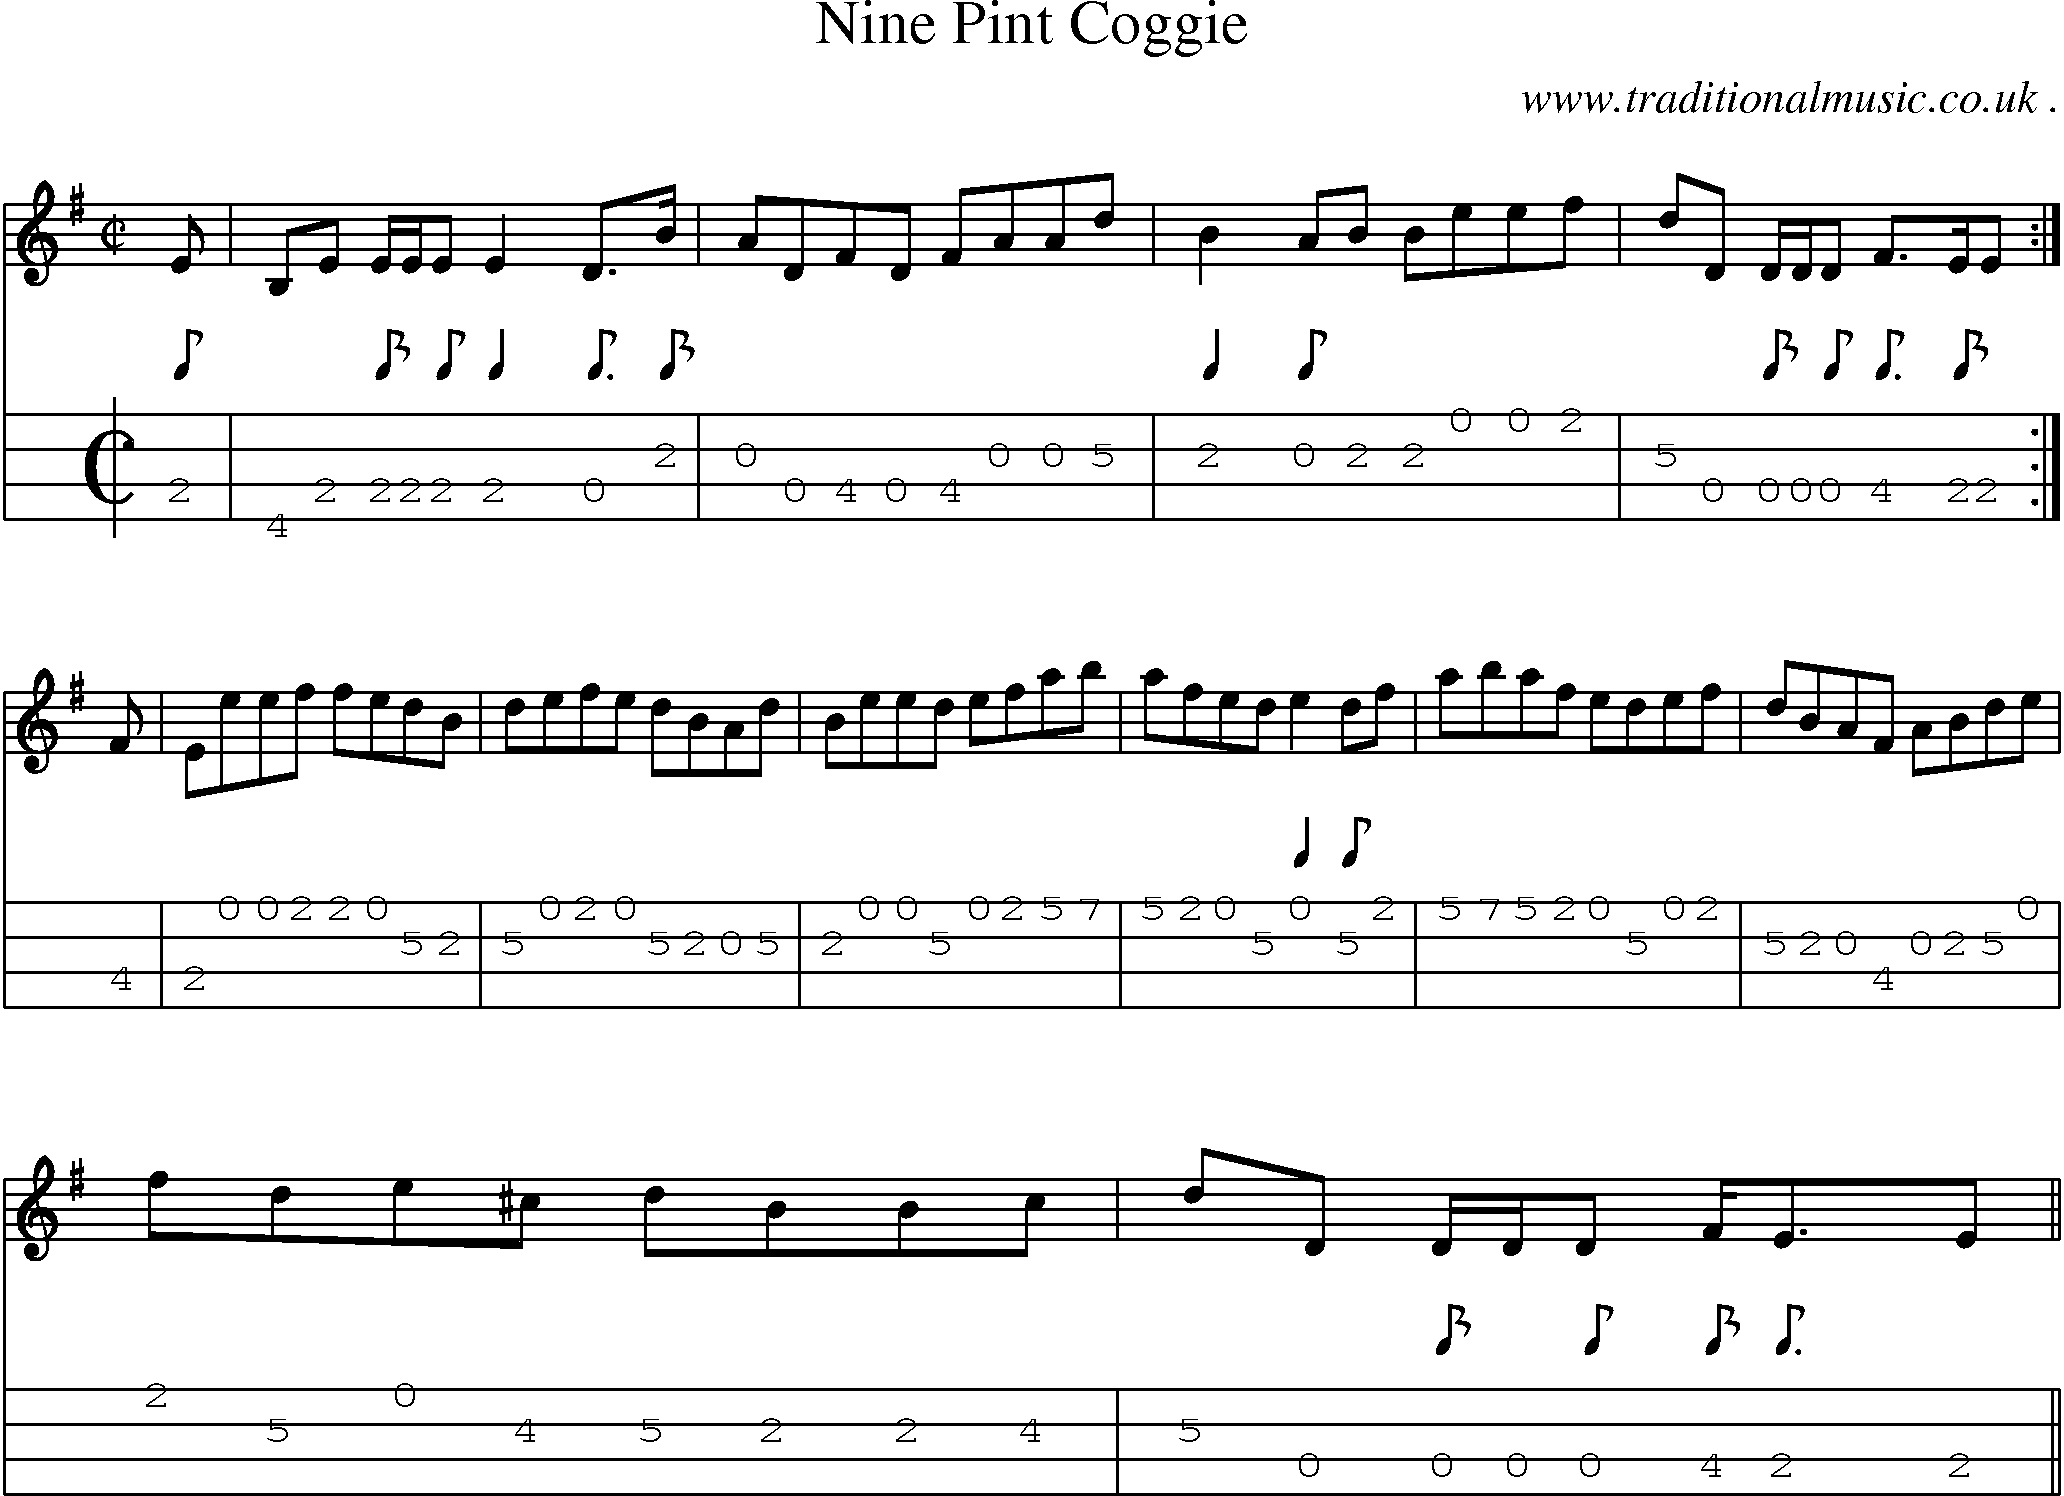 Sheet-music  score, Chords and Mandolin Tabs for Nine Pint Coggie